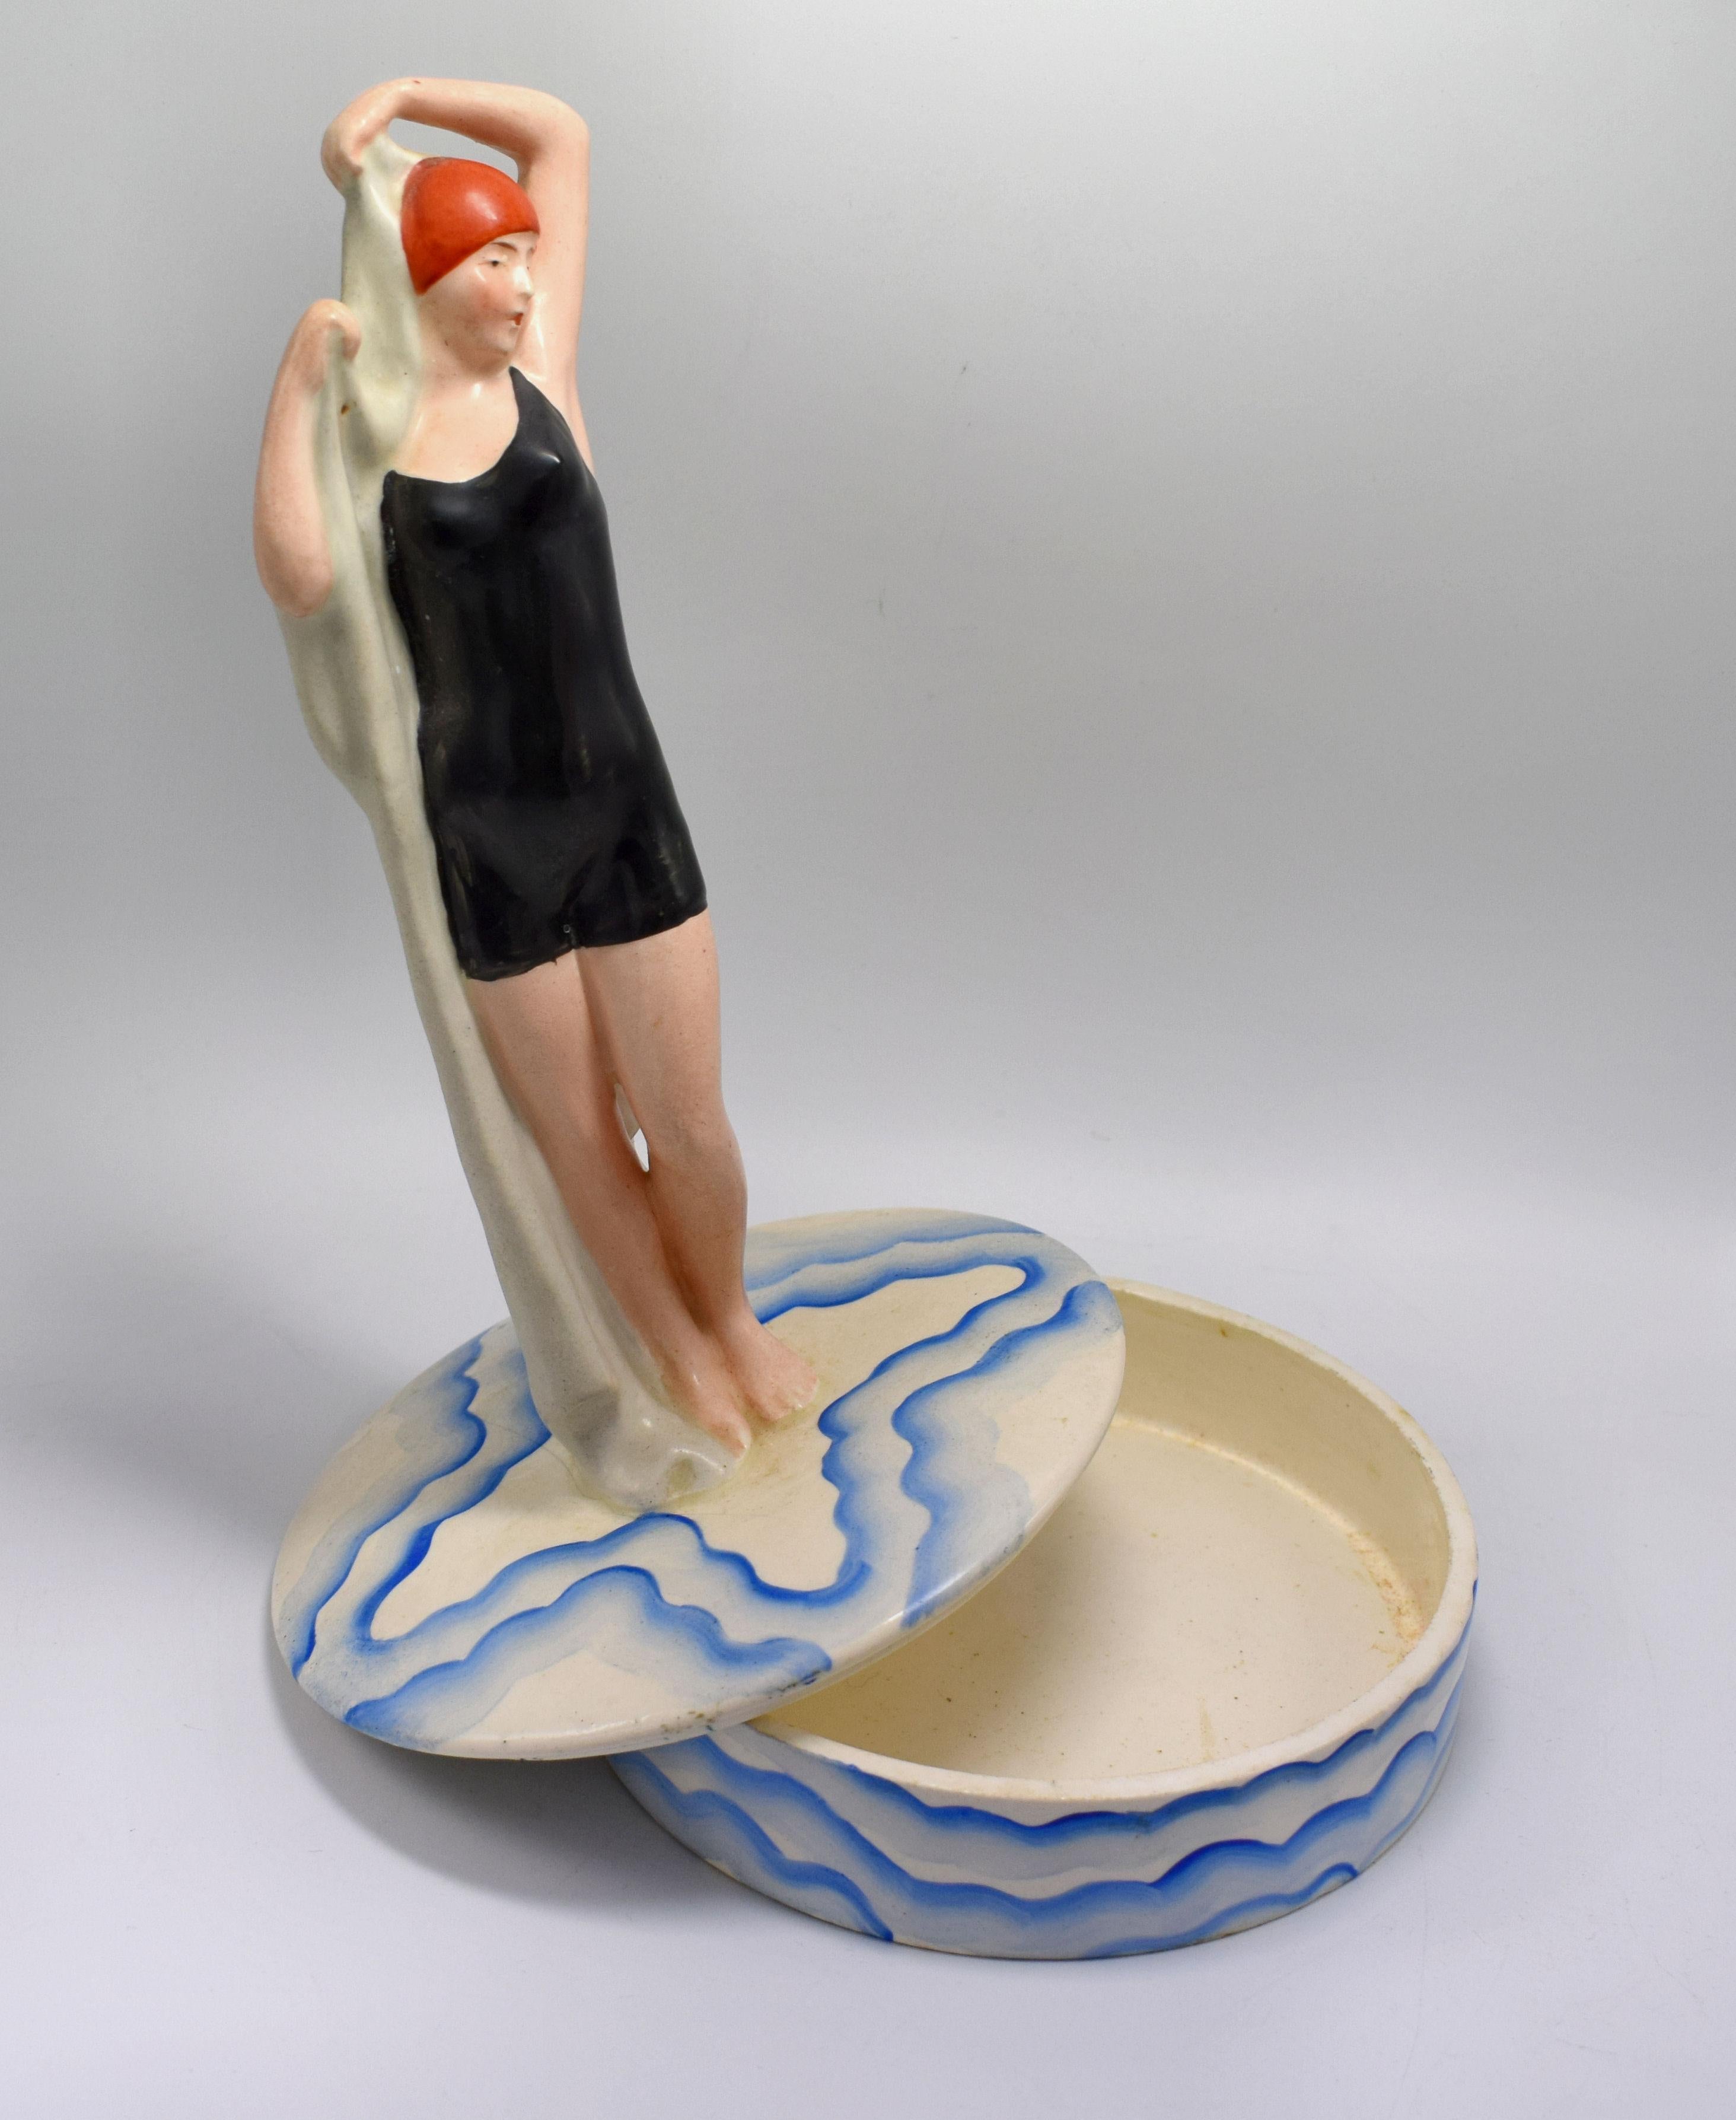 For your consideration is this rare and very enchanting ceramic powder / trinket box, dating to the 1930s, sourced in US. Depicts a flapper girl stood drying herself with a bath towel dressed in the fashion of the day bathing costume. The base,